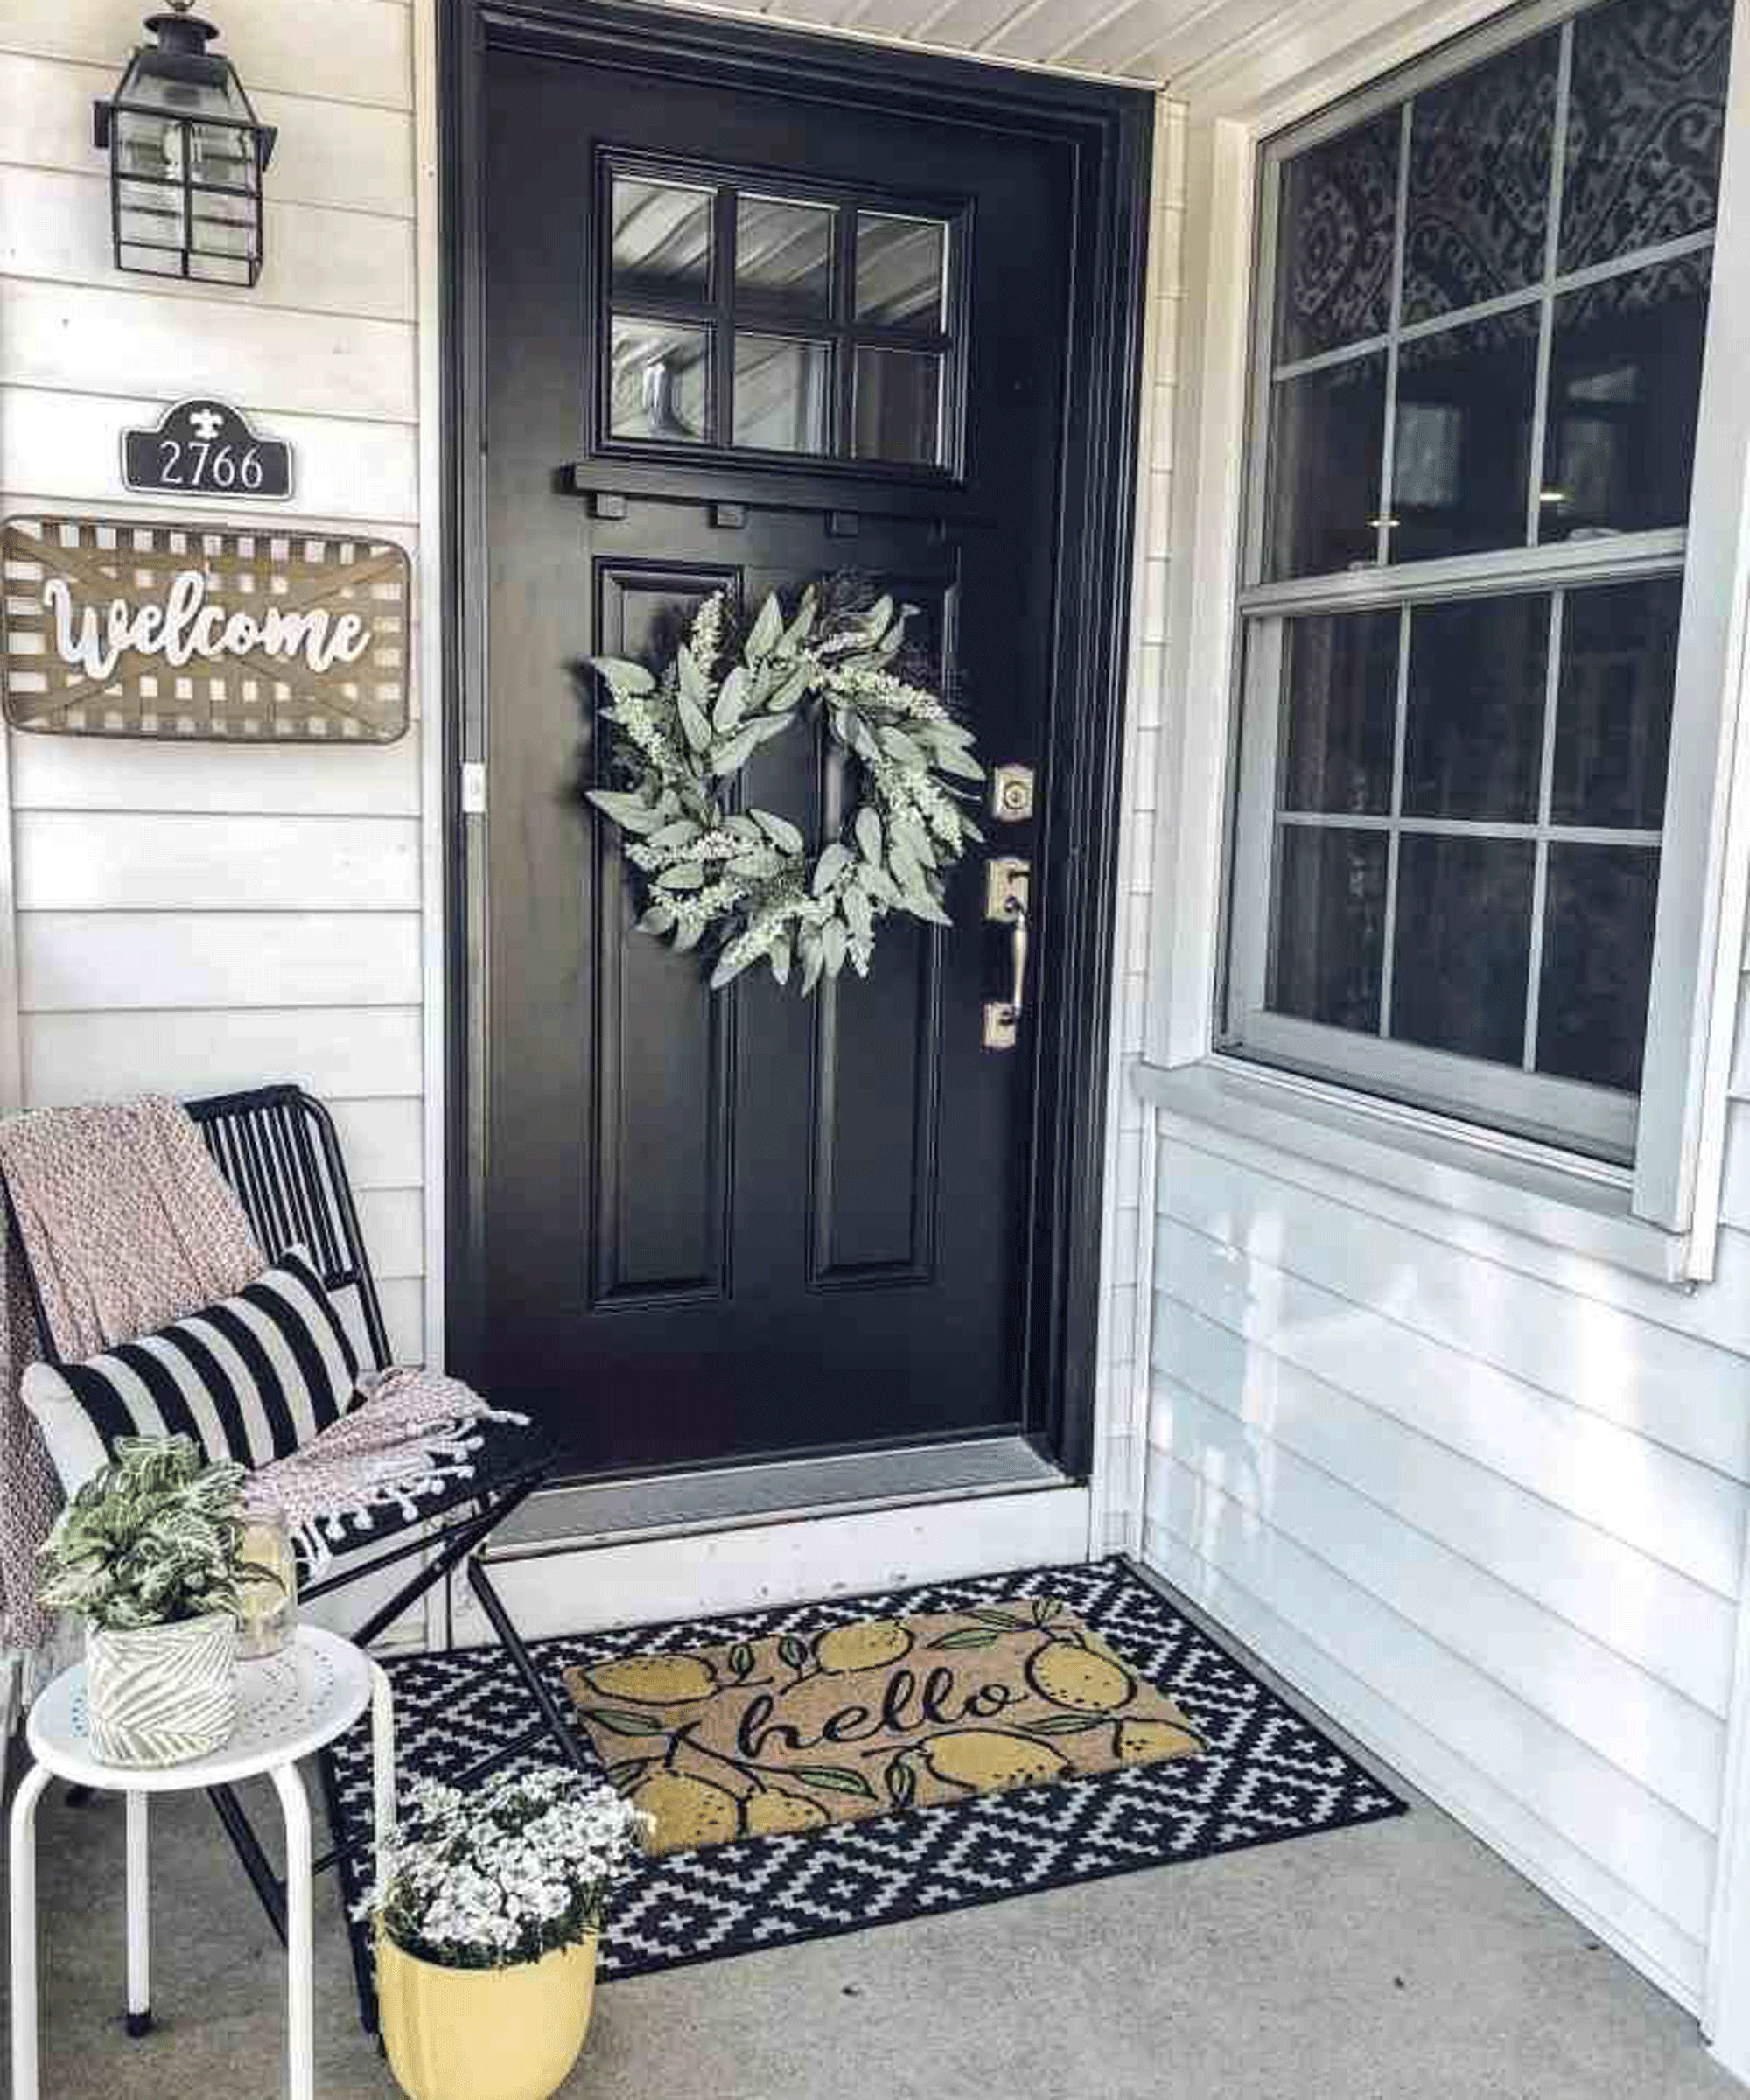 Rustic porch full of mixed textures, with wreath on door, and hello doormat, and welcome sign on wood paneling exterior.